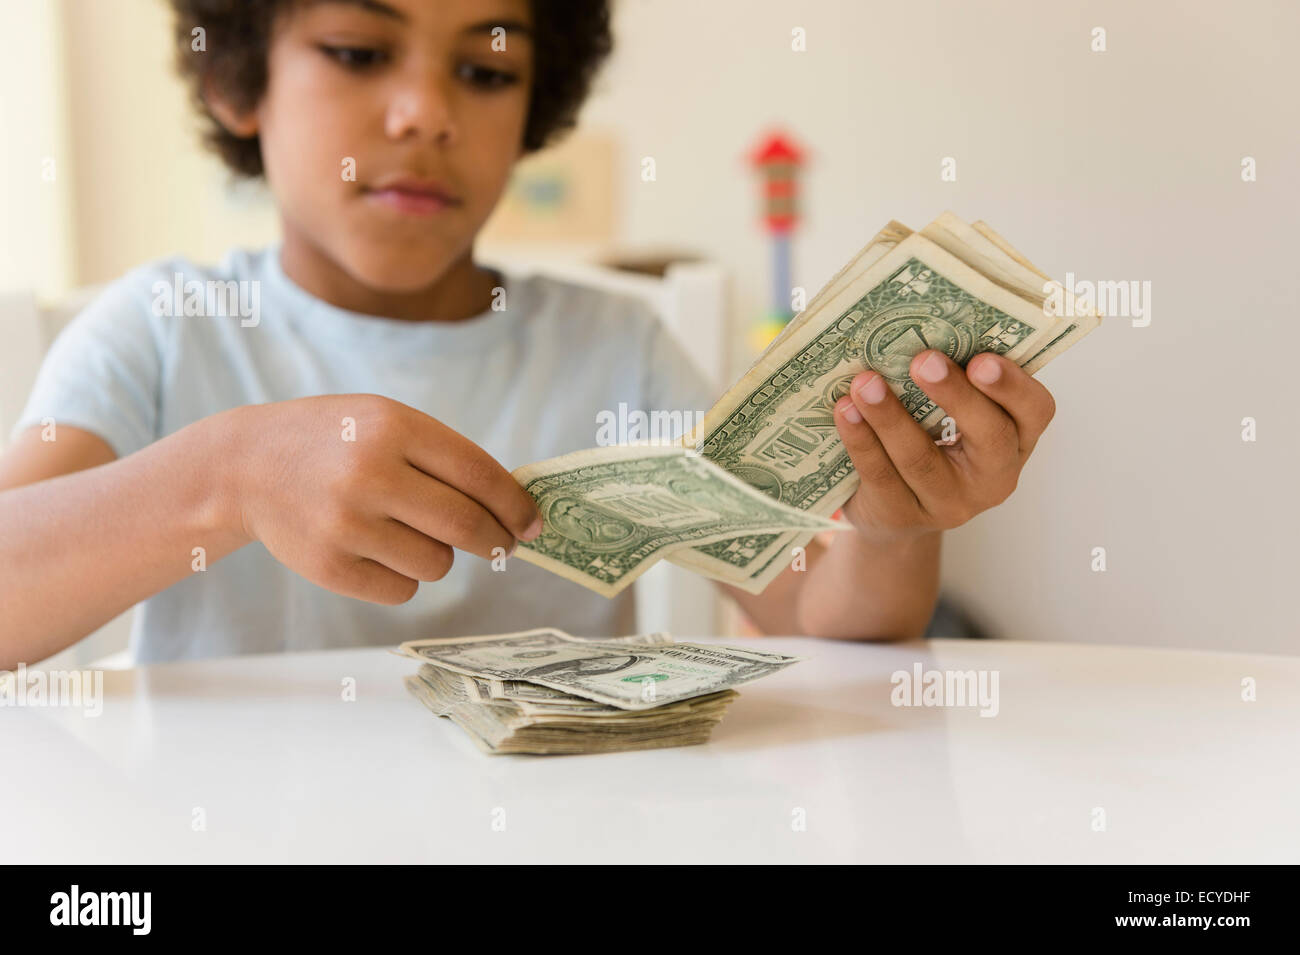 Mixed race boy counting money Stock Photo